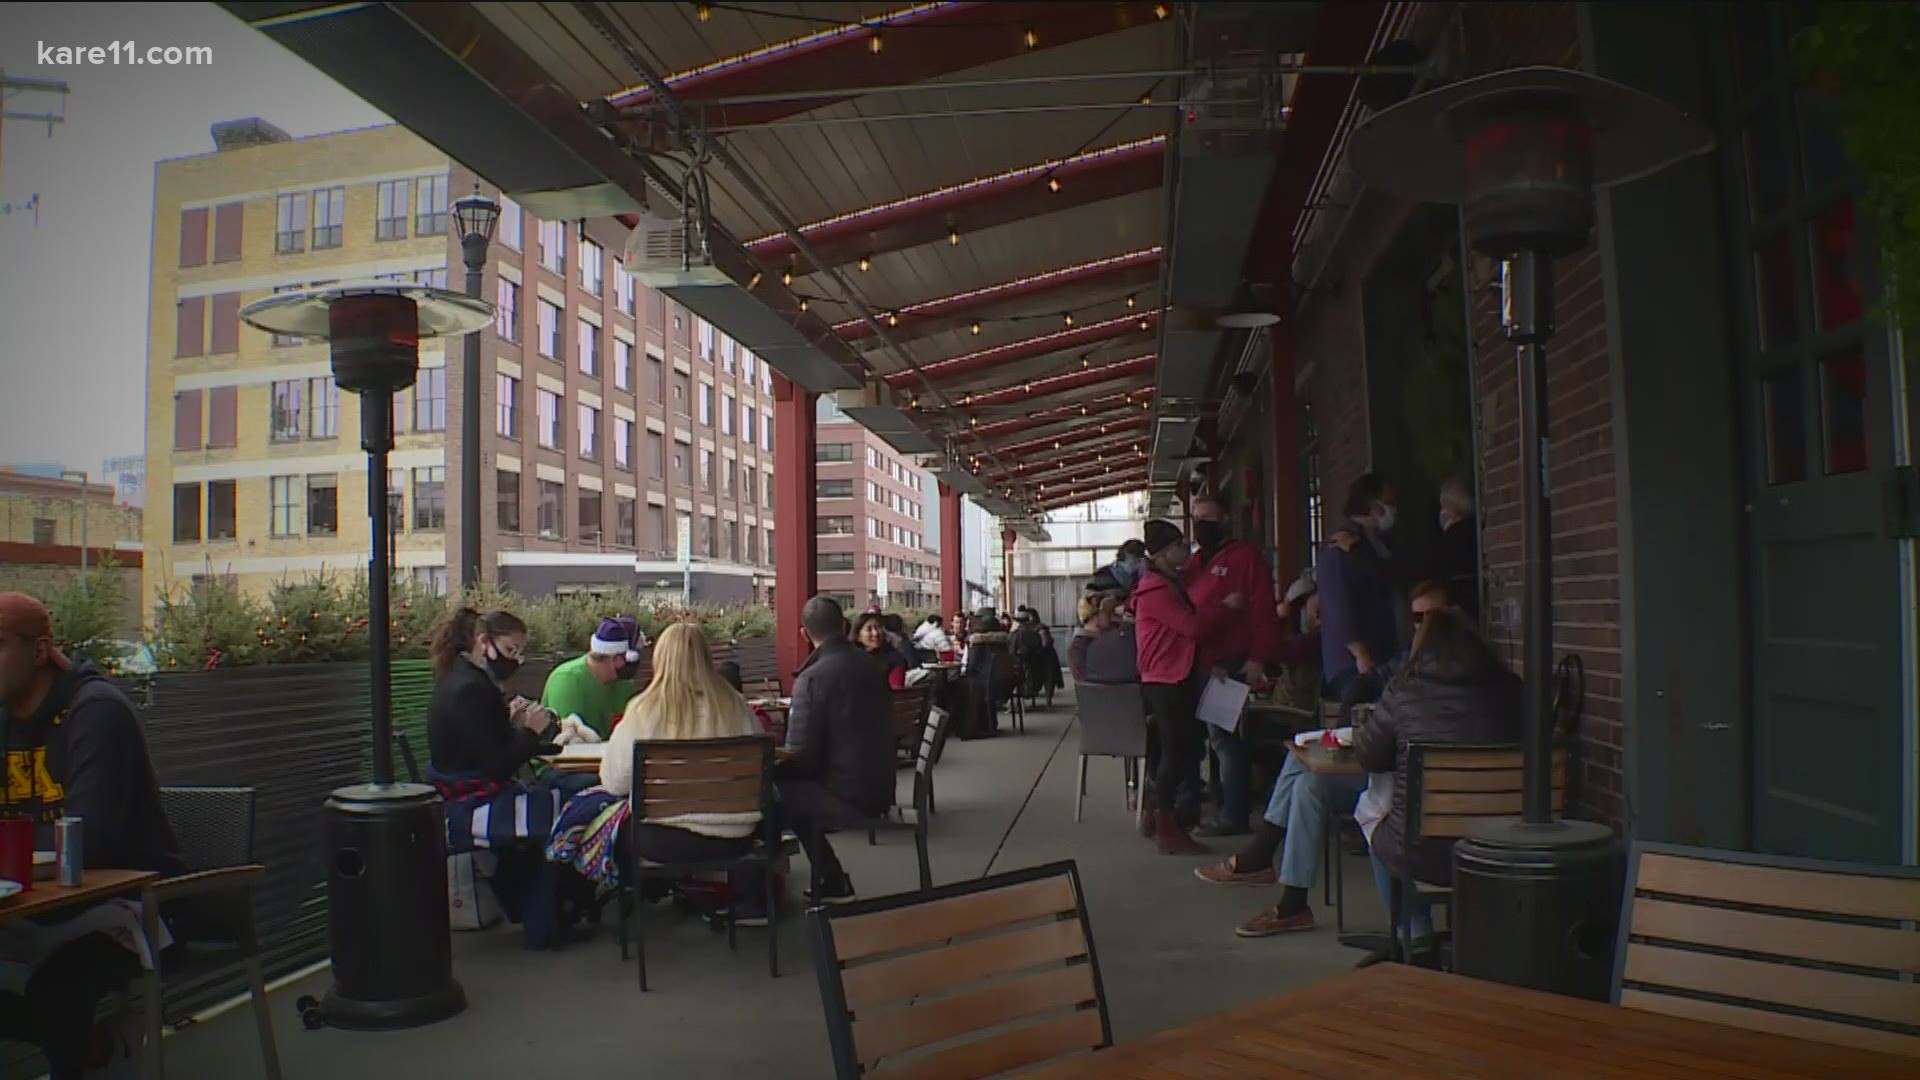 Gov. Tim Walz announced new statewide COVID-19 restrictions earlier this week, which included allowing restaurants to open for outdoor dining Saturday.